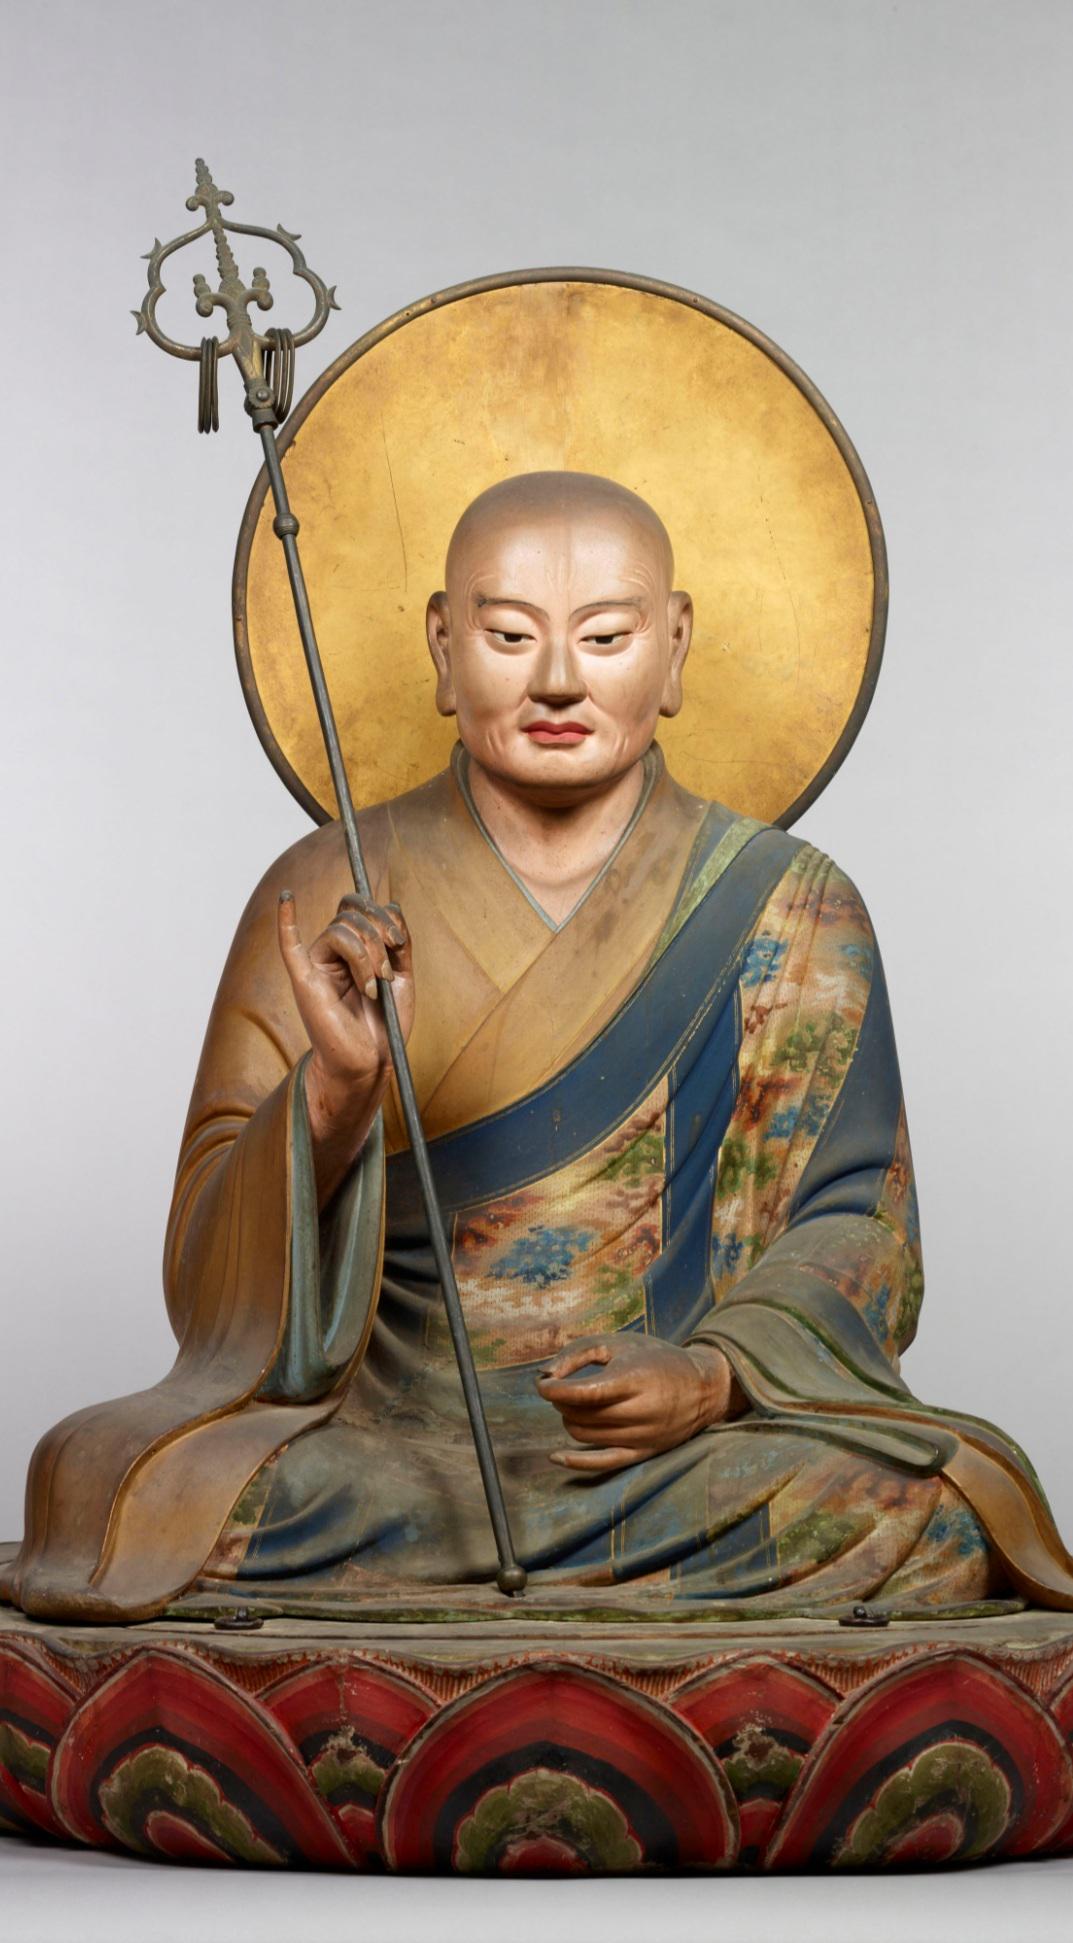 A painted wooden statue of the Shintō deity Hachiman, often referred to as the god of war. Made by the sculptor Kaikei in 1201 CE. Kamakura period, now housed at the Tōdai-ji temple in Nara, Japan.jpeg